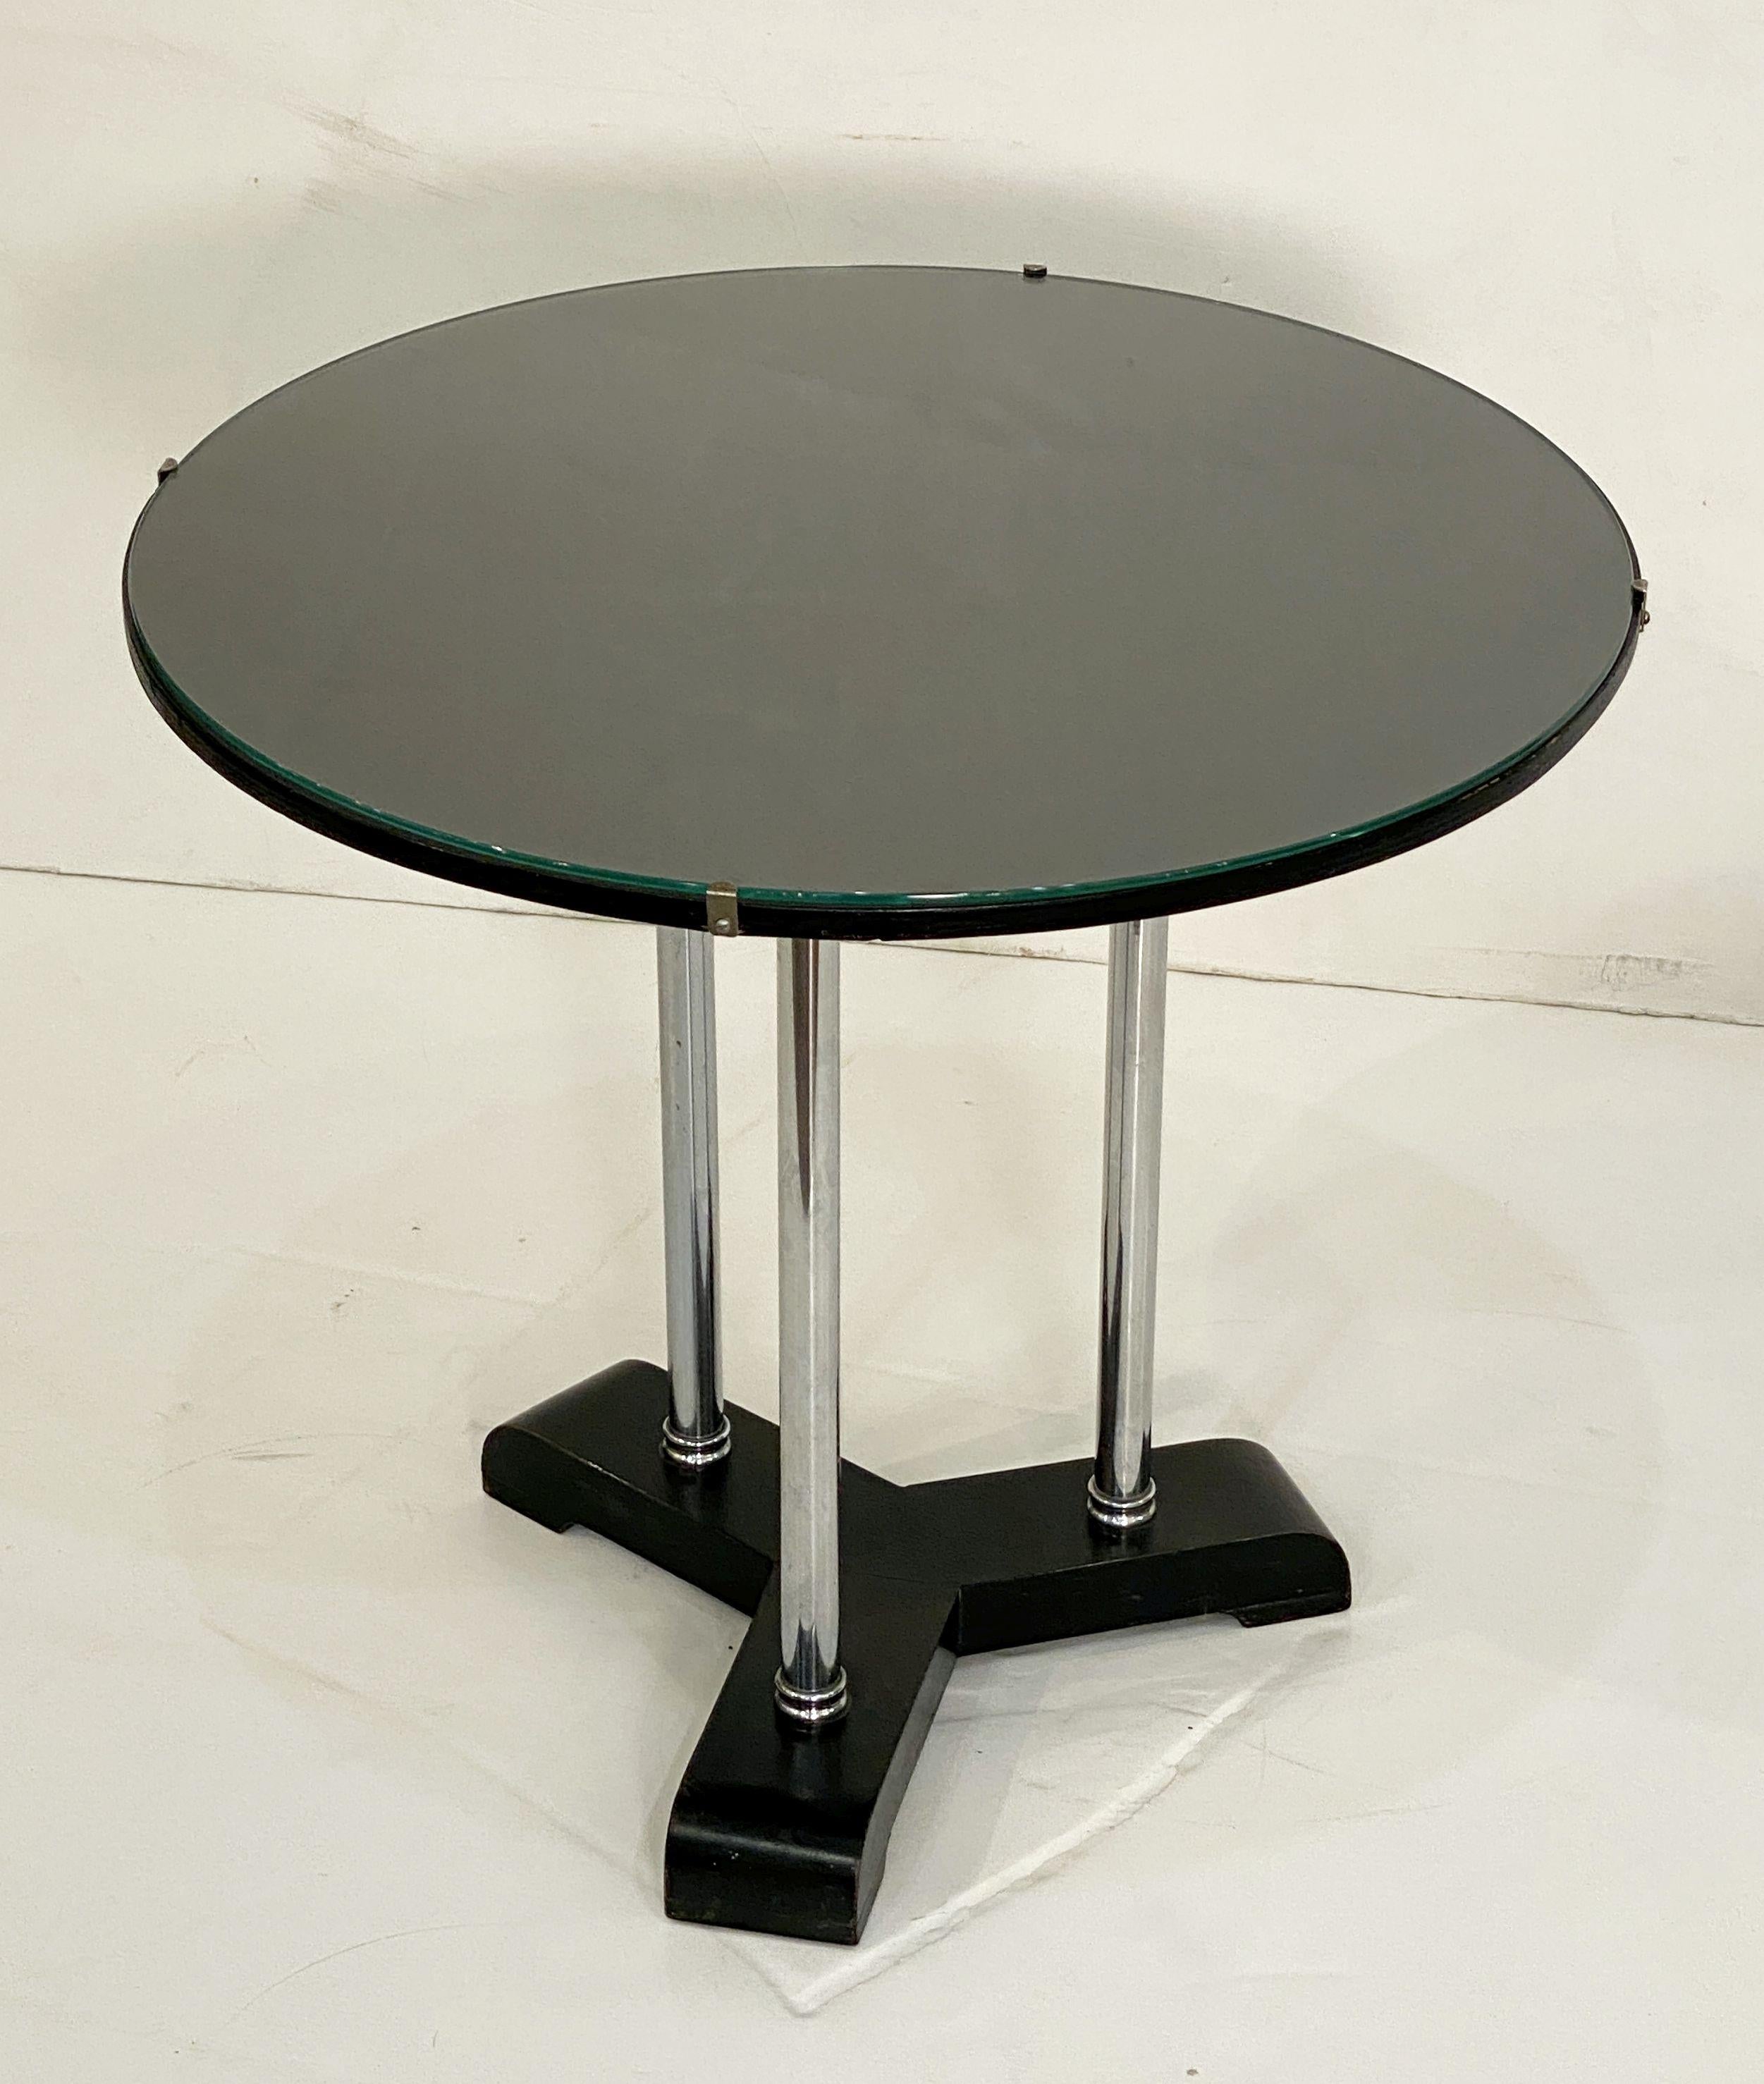 English Art Deco Round Drinks Tripod Table of Chrome, Ebonized Wood, and Glass For Sale 4